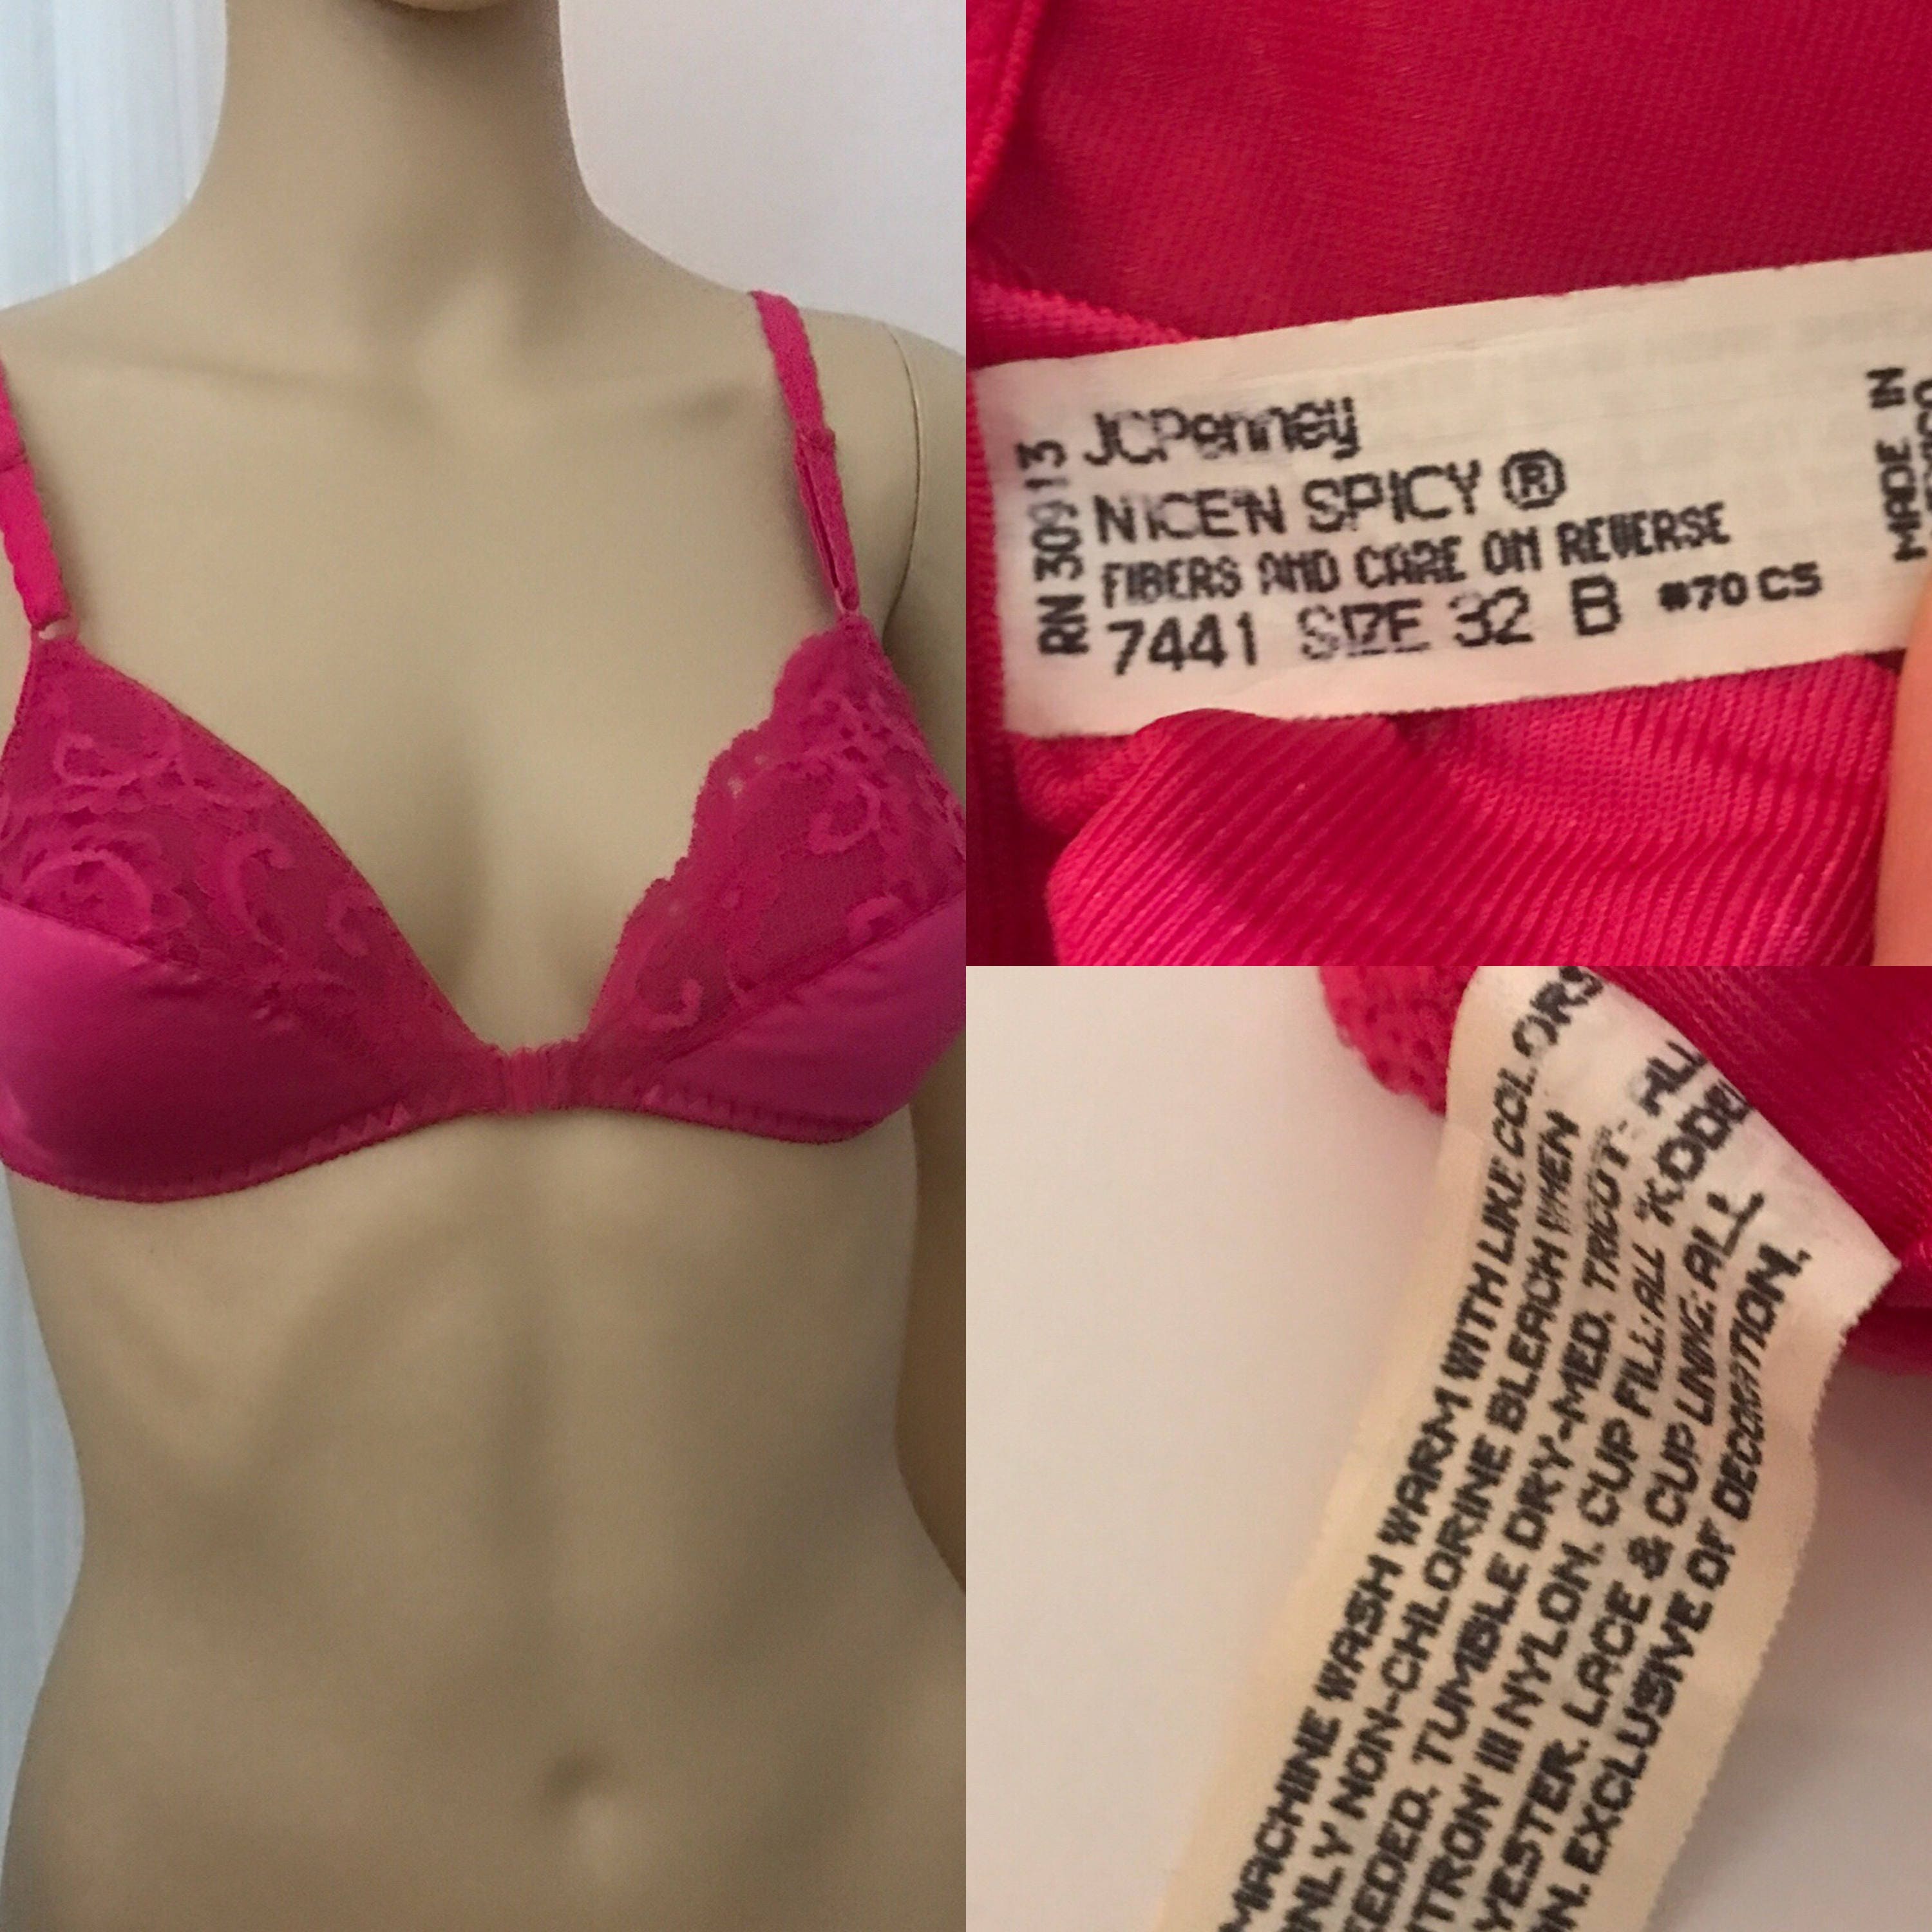 Vintage JCPenney Nice'N Spicy Antron III Nylon Soft Cup Lace Bra